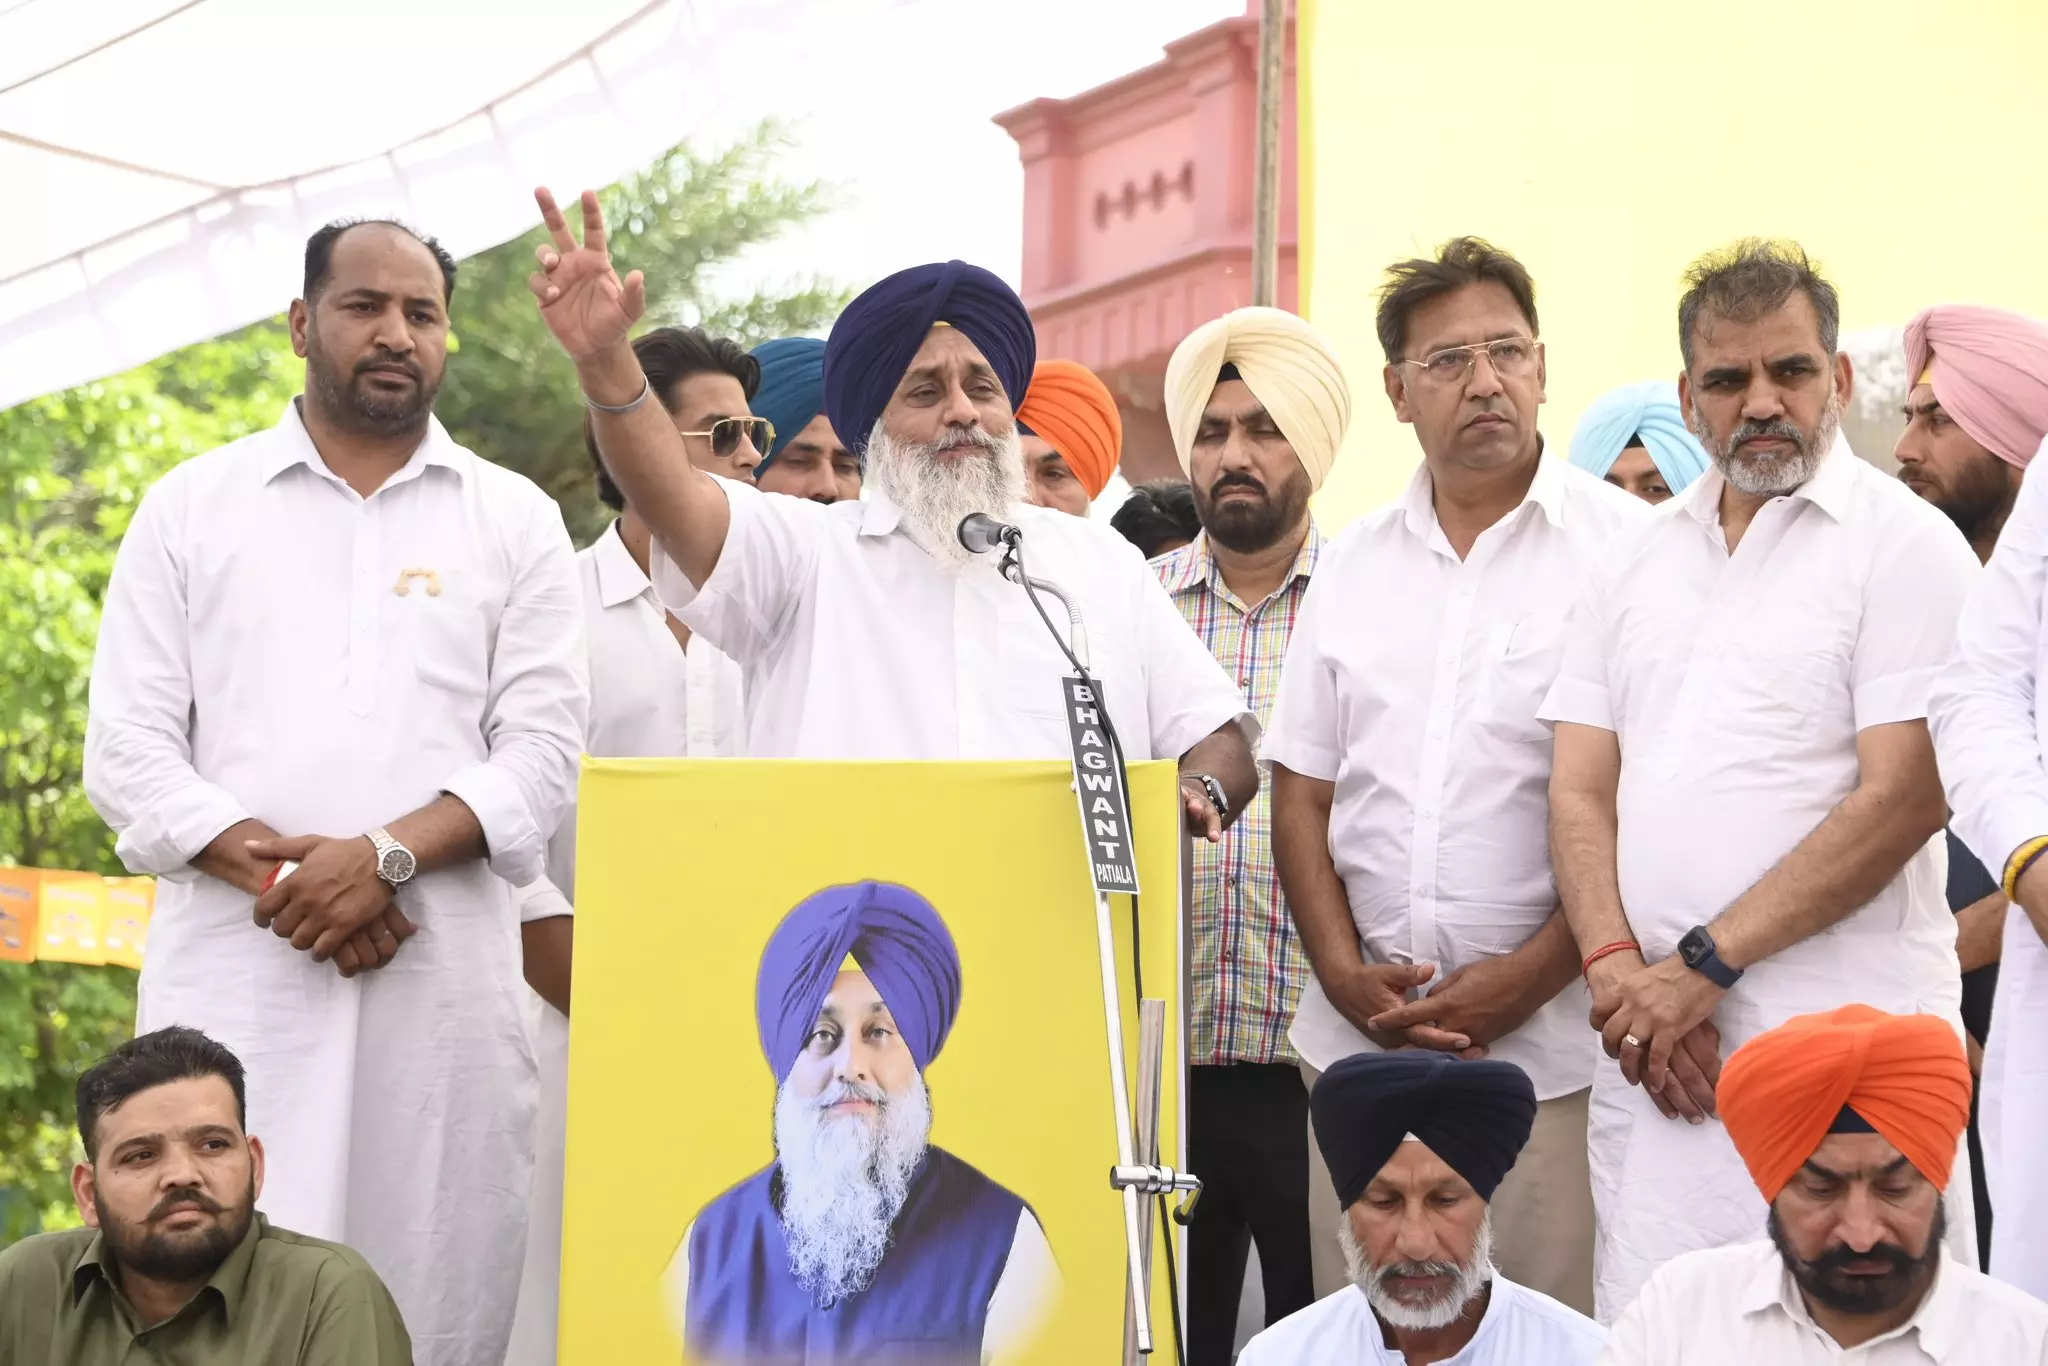 Central agencies started campaign against SAD immediately after it quit NDA govt: Badal